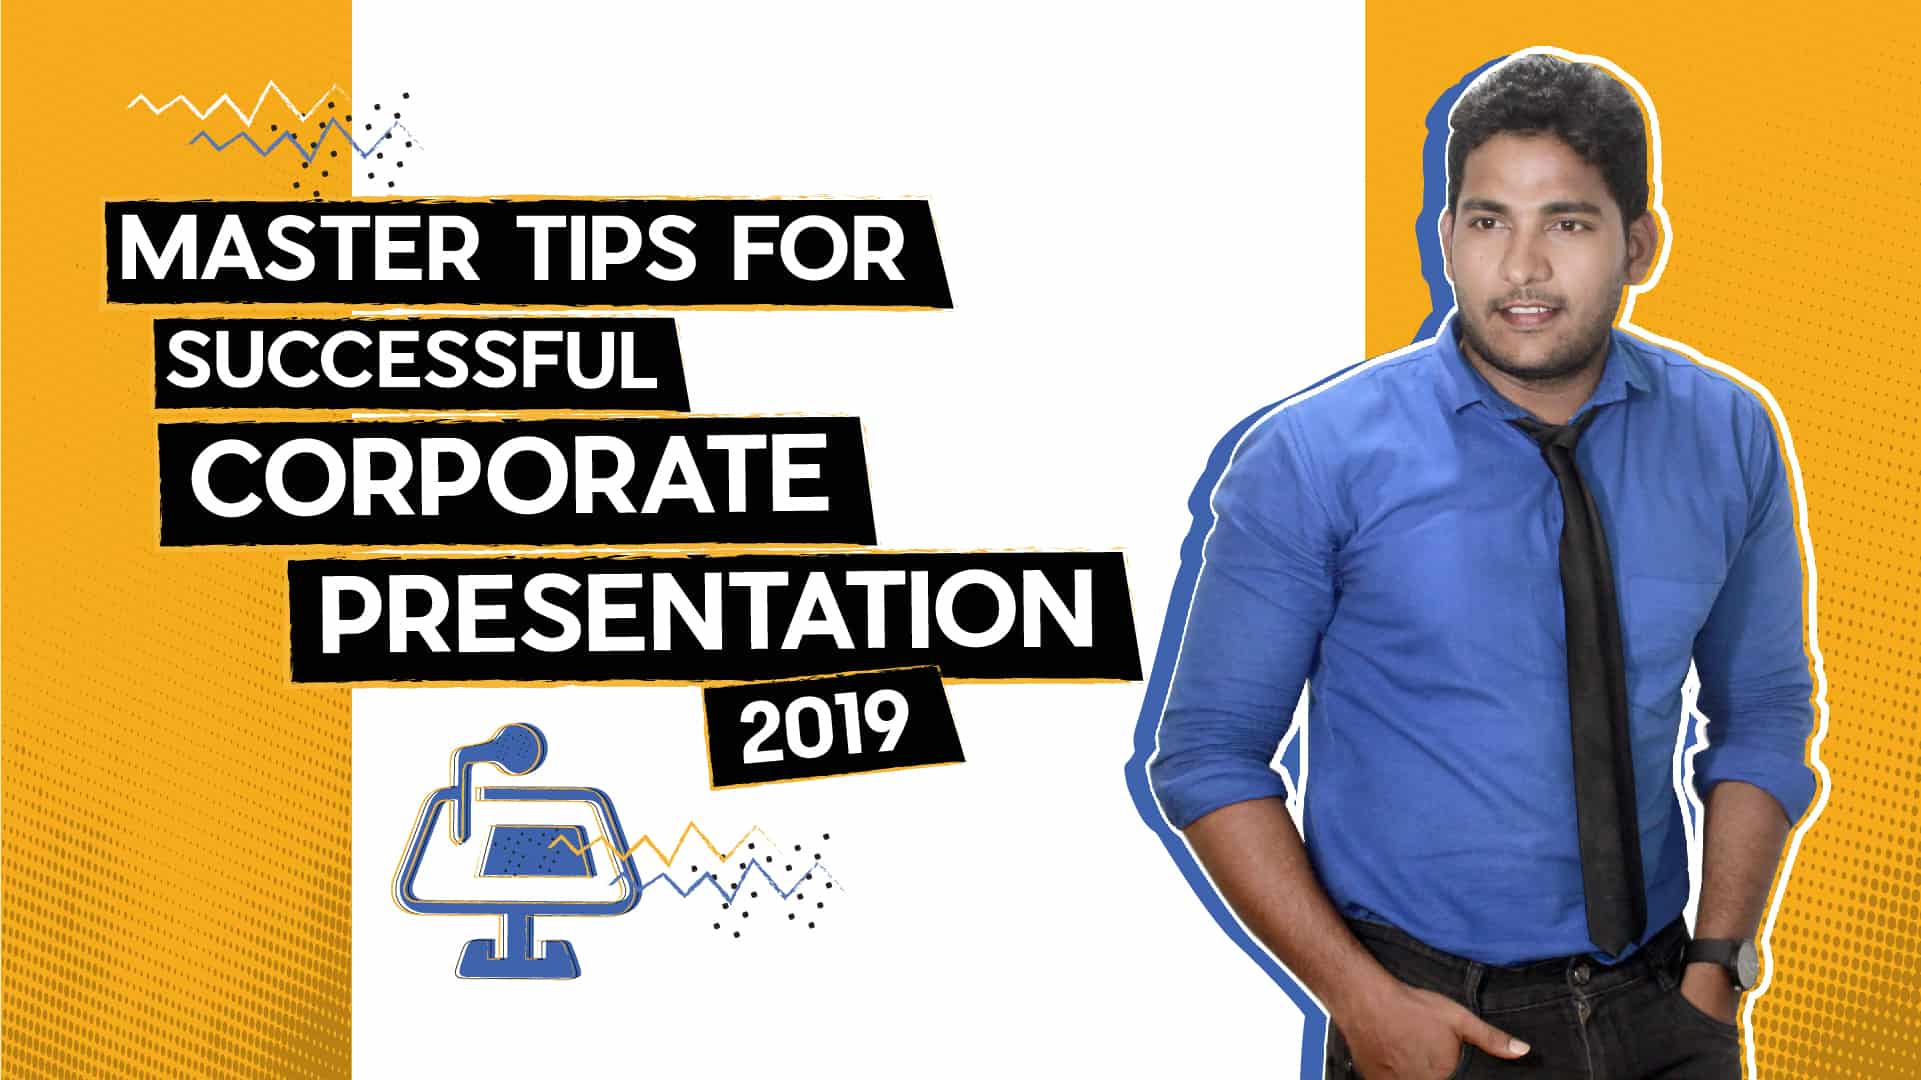 Master tips for successful corporate presentation 2019